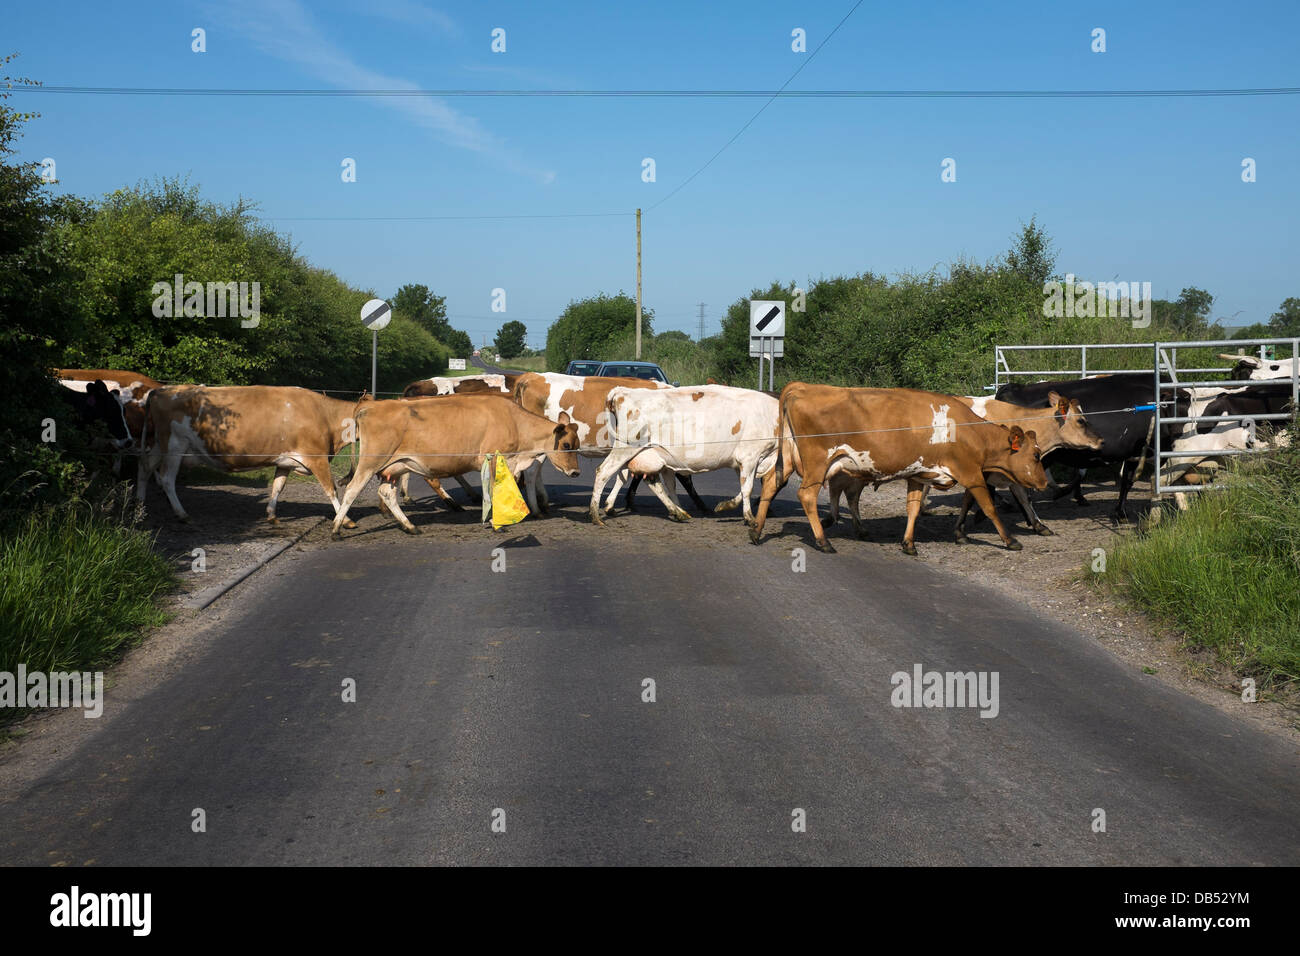 Cattle Crossing Rural Road Stock Photo